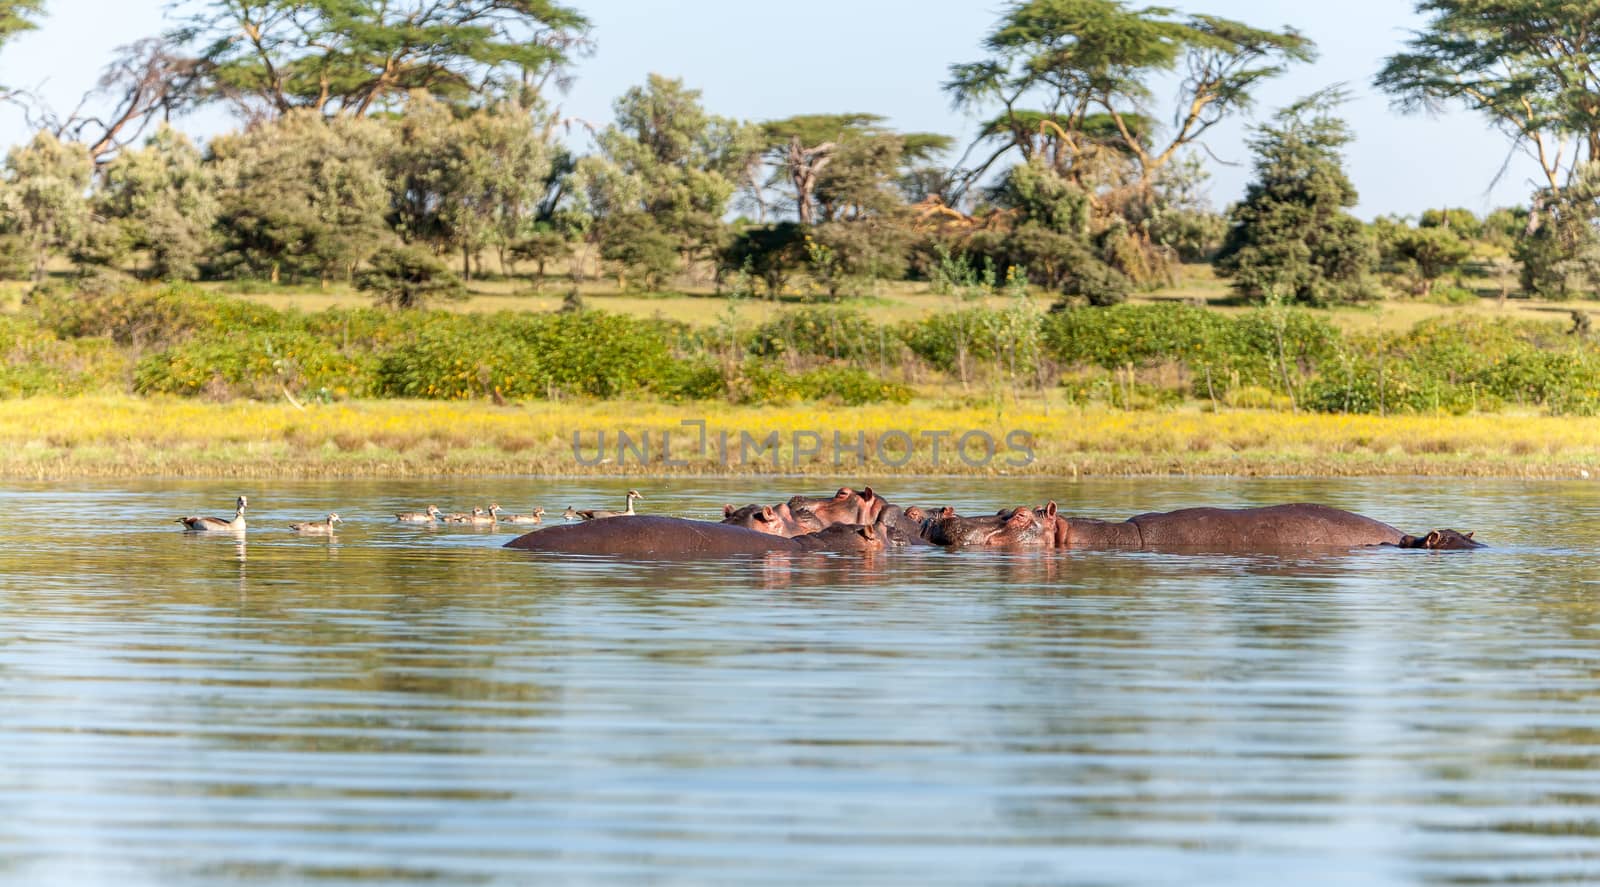 Group of hippopotamus in water by master1305